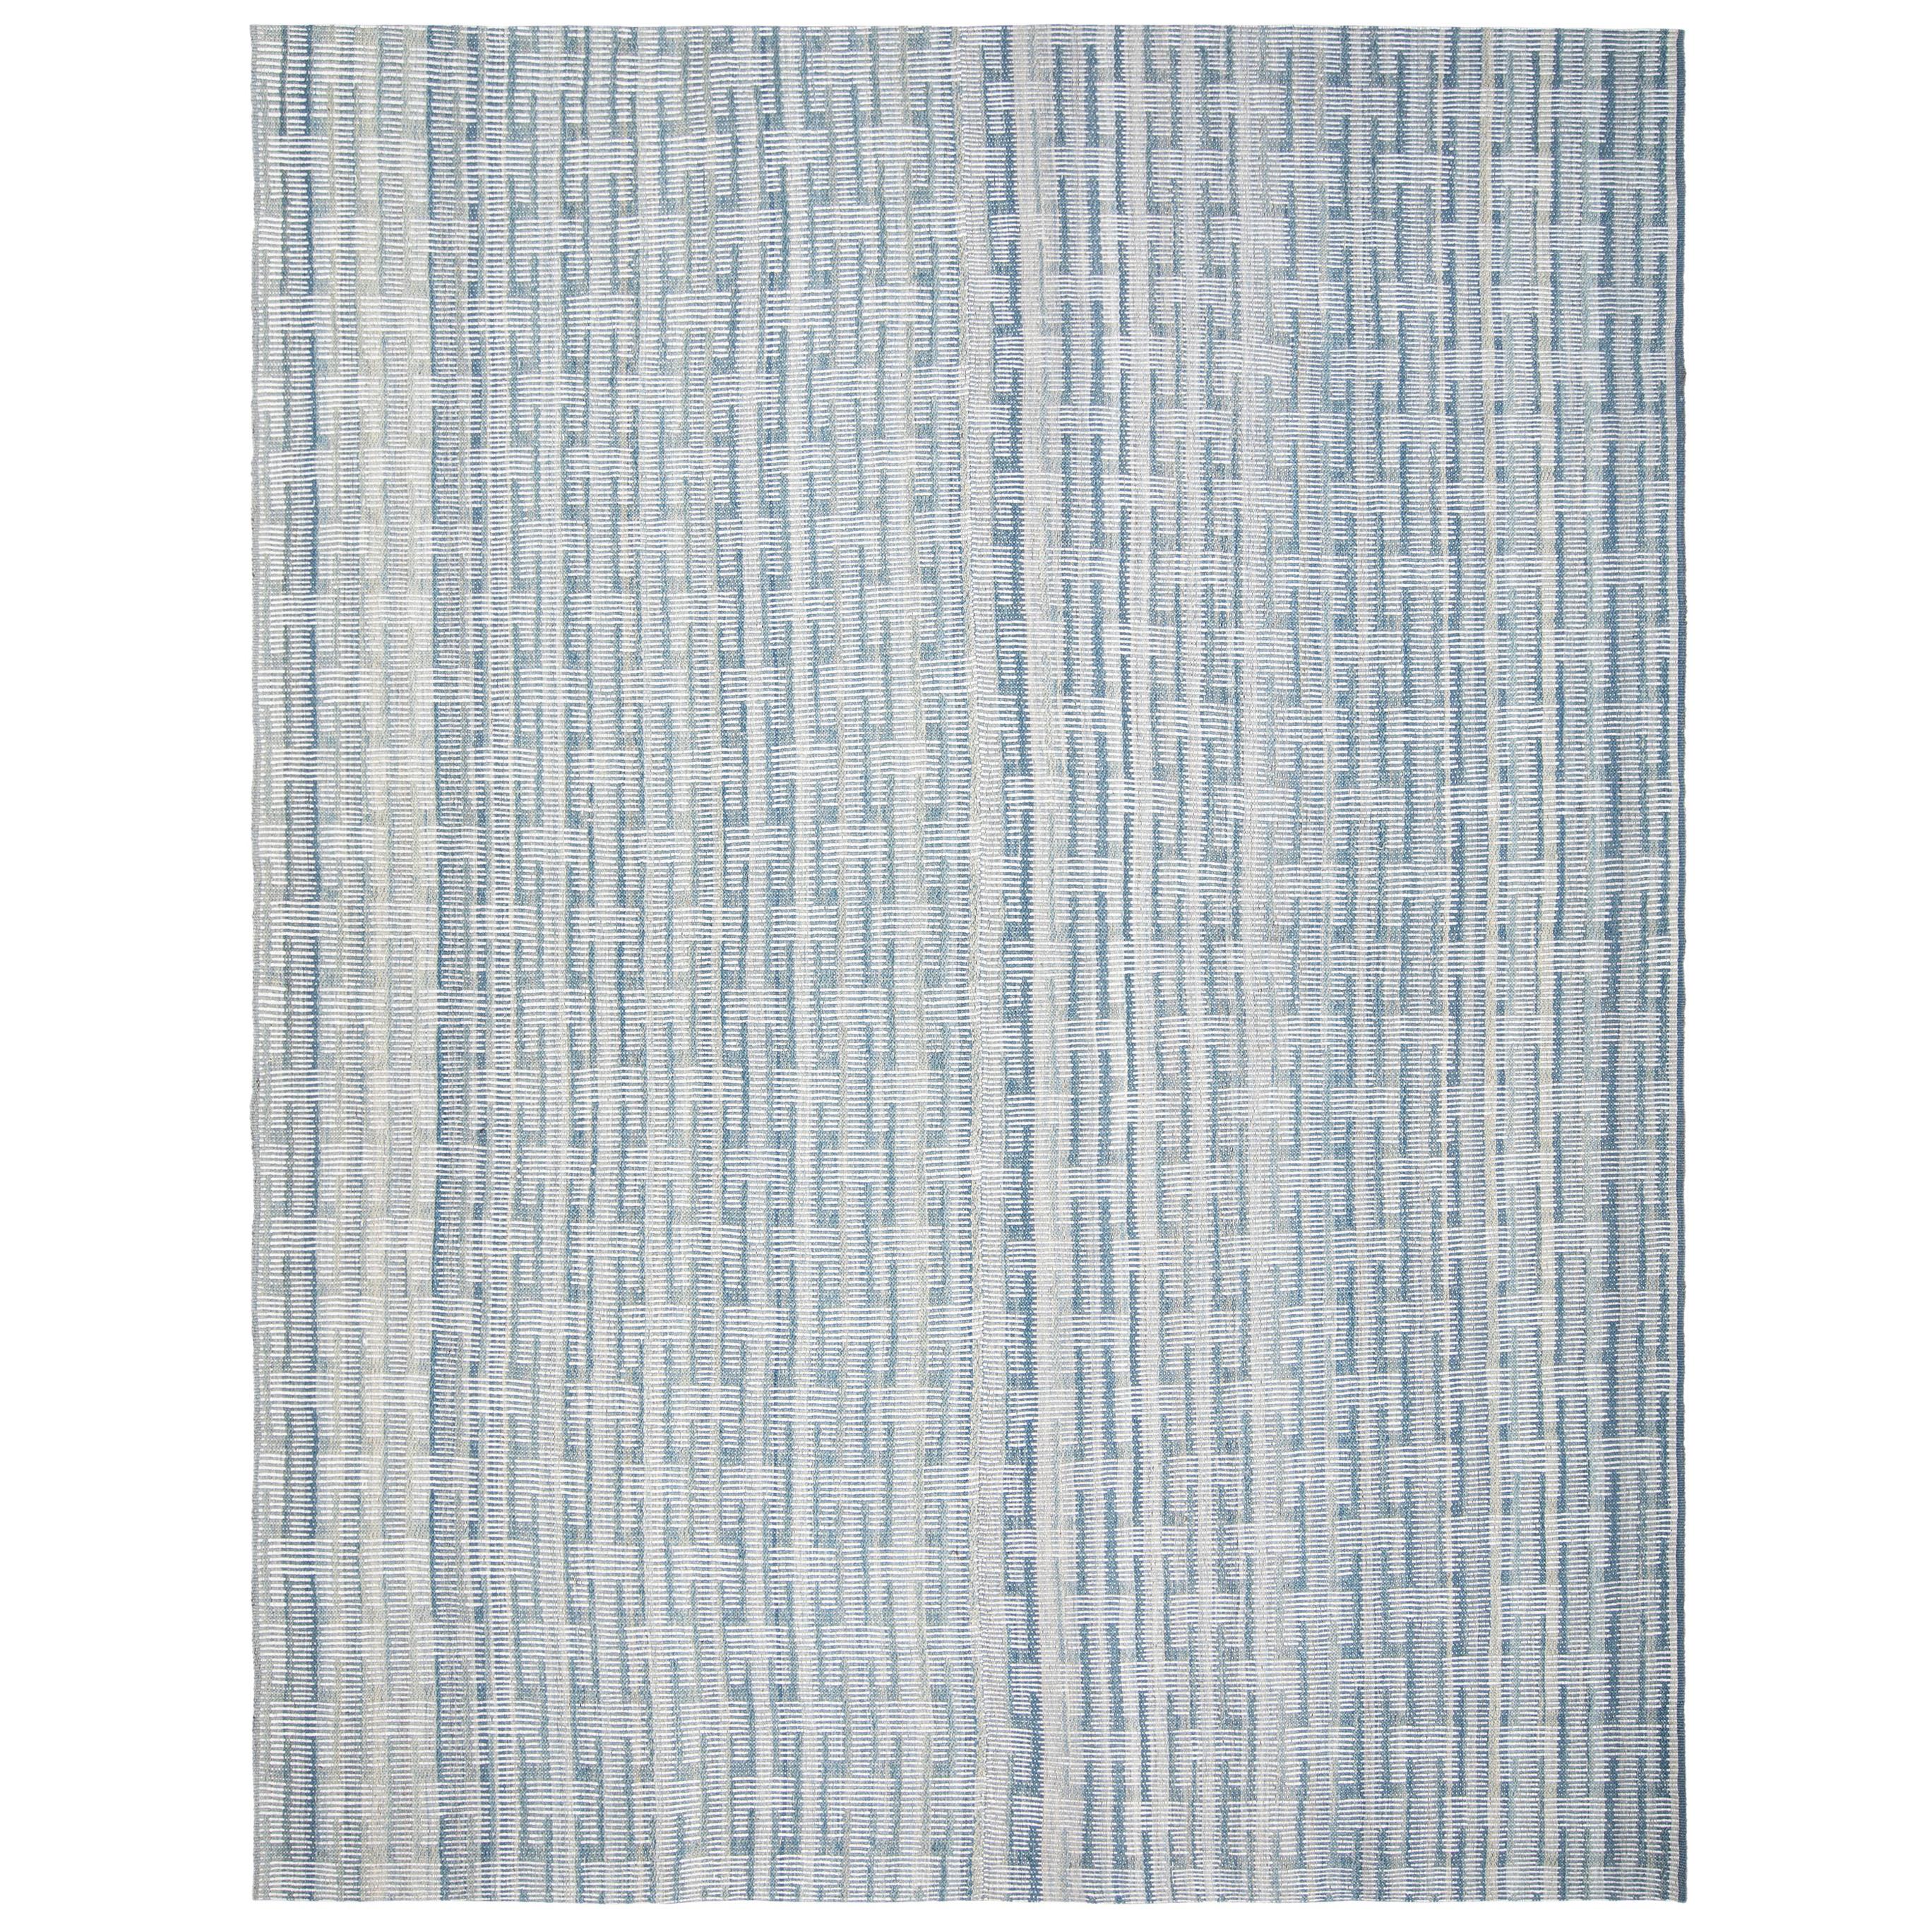 Mid-Century Modern Handwoven Flat-Weave Rug in Shades of Blue